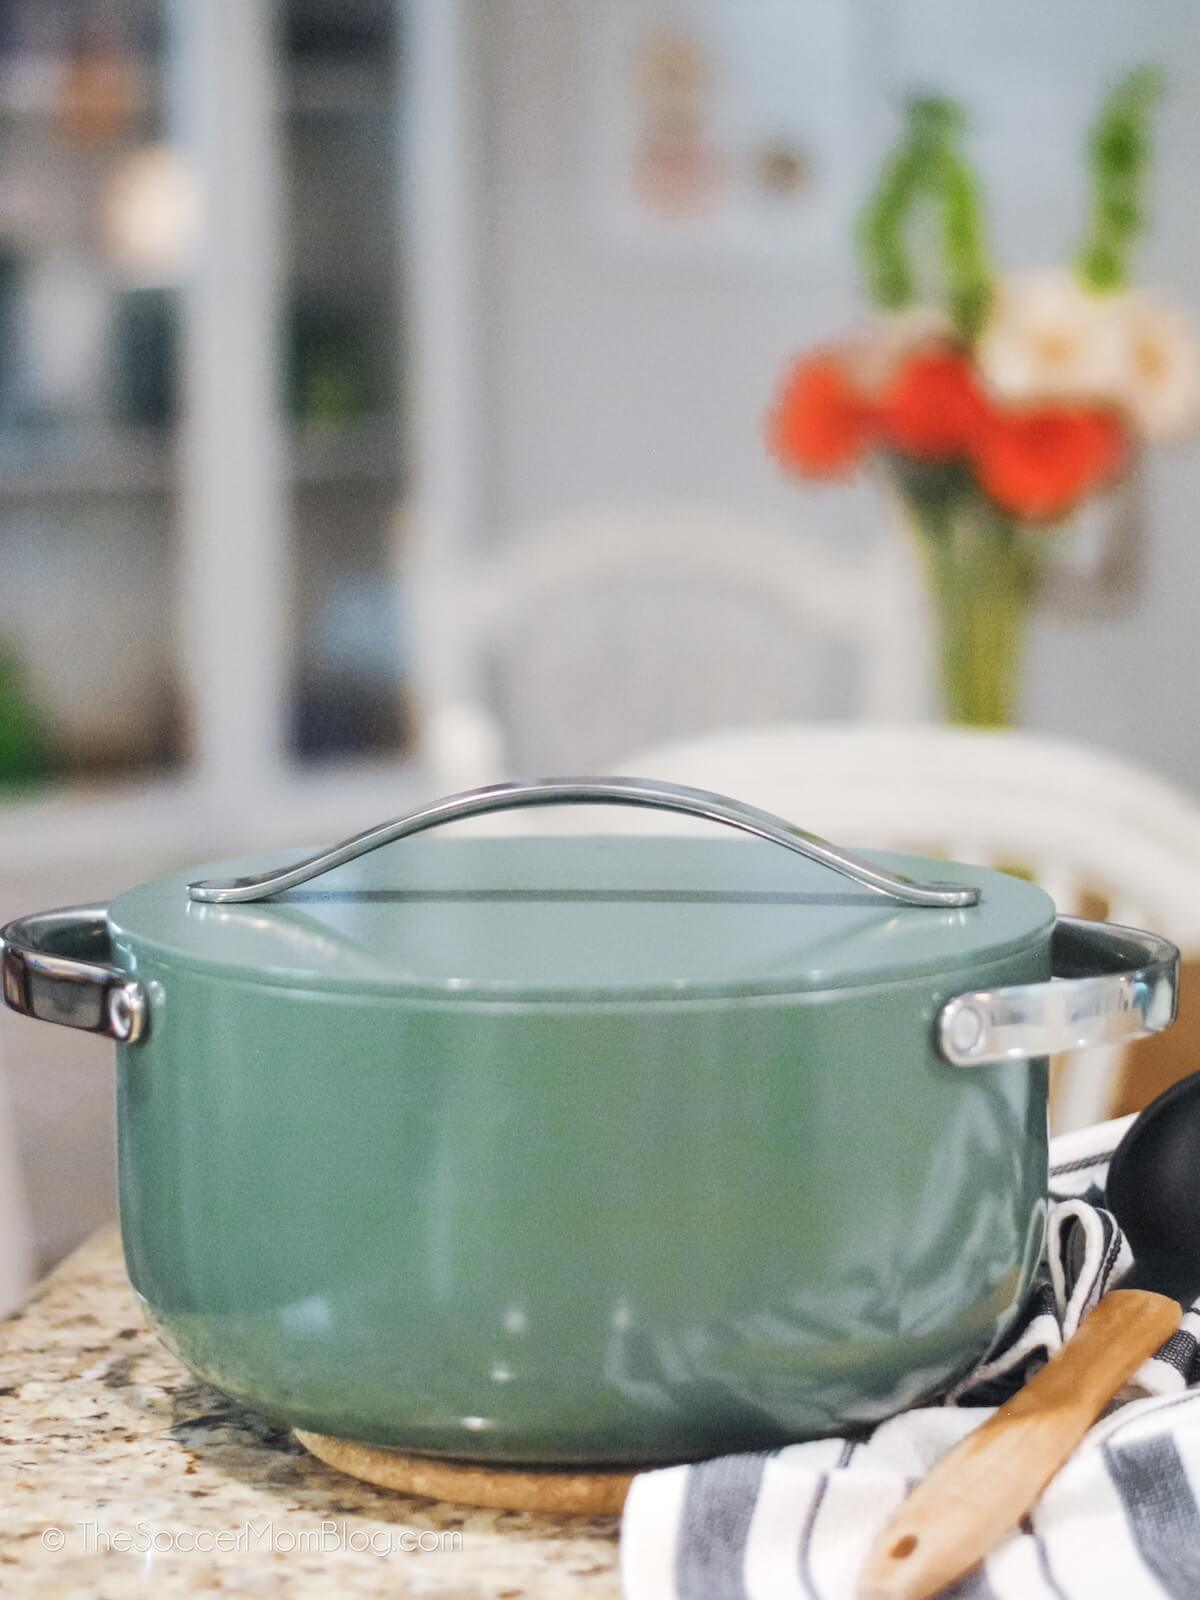 Caraway Cookware Dutch oven pot in a kitchen setting